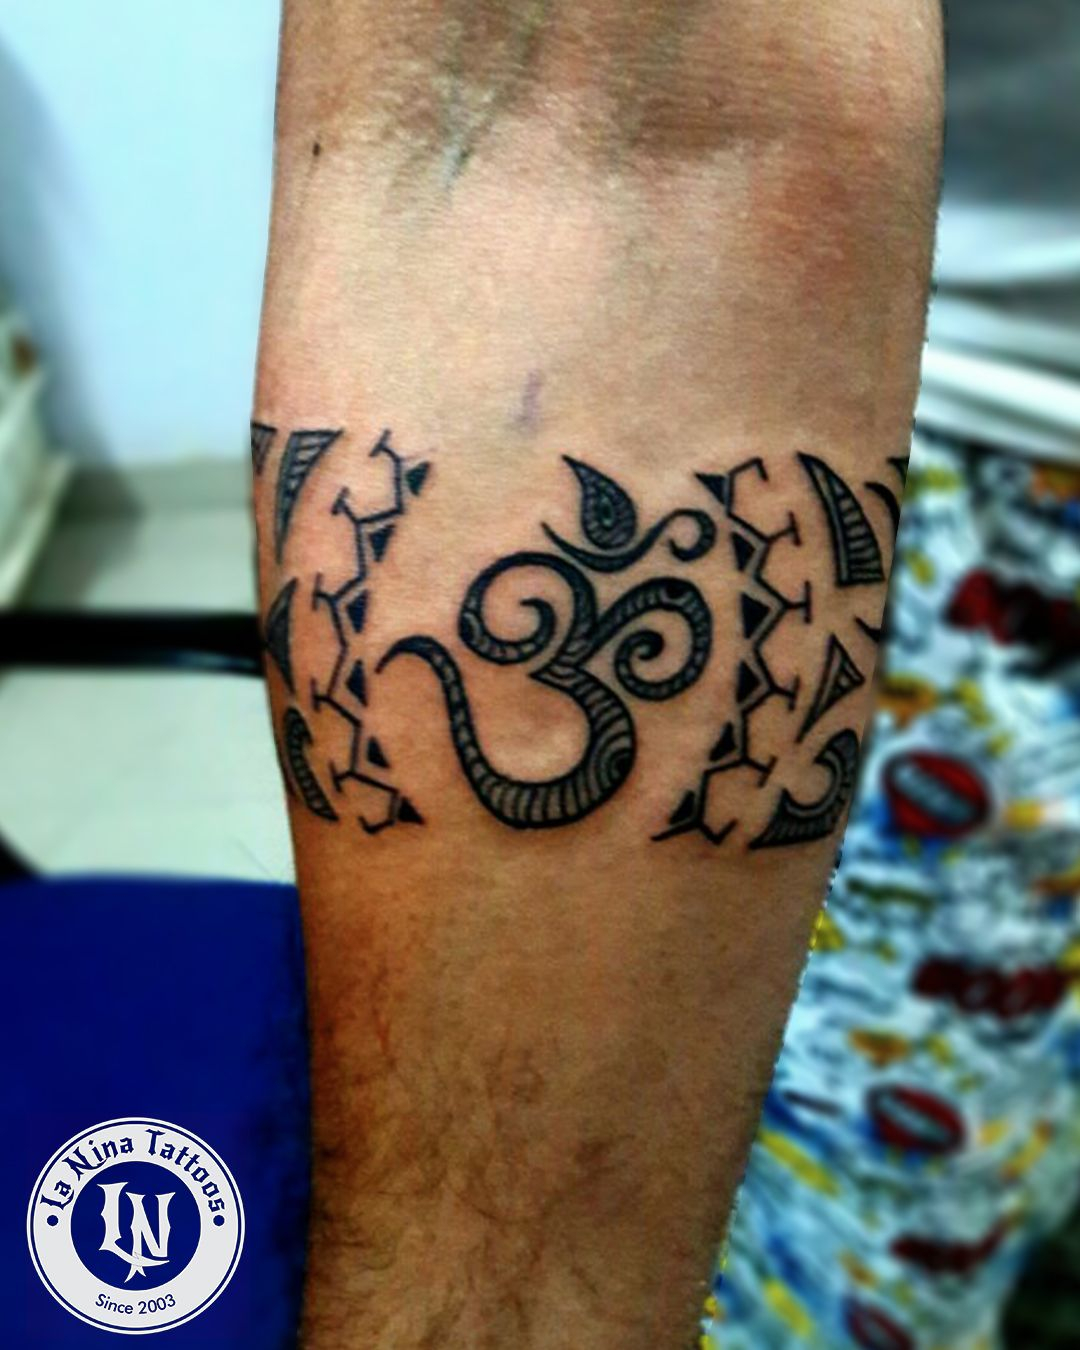 Traditional Arm Band Tattoo With Om Done At La Nina Tattoos intended for measurements 1080 X 1350